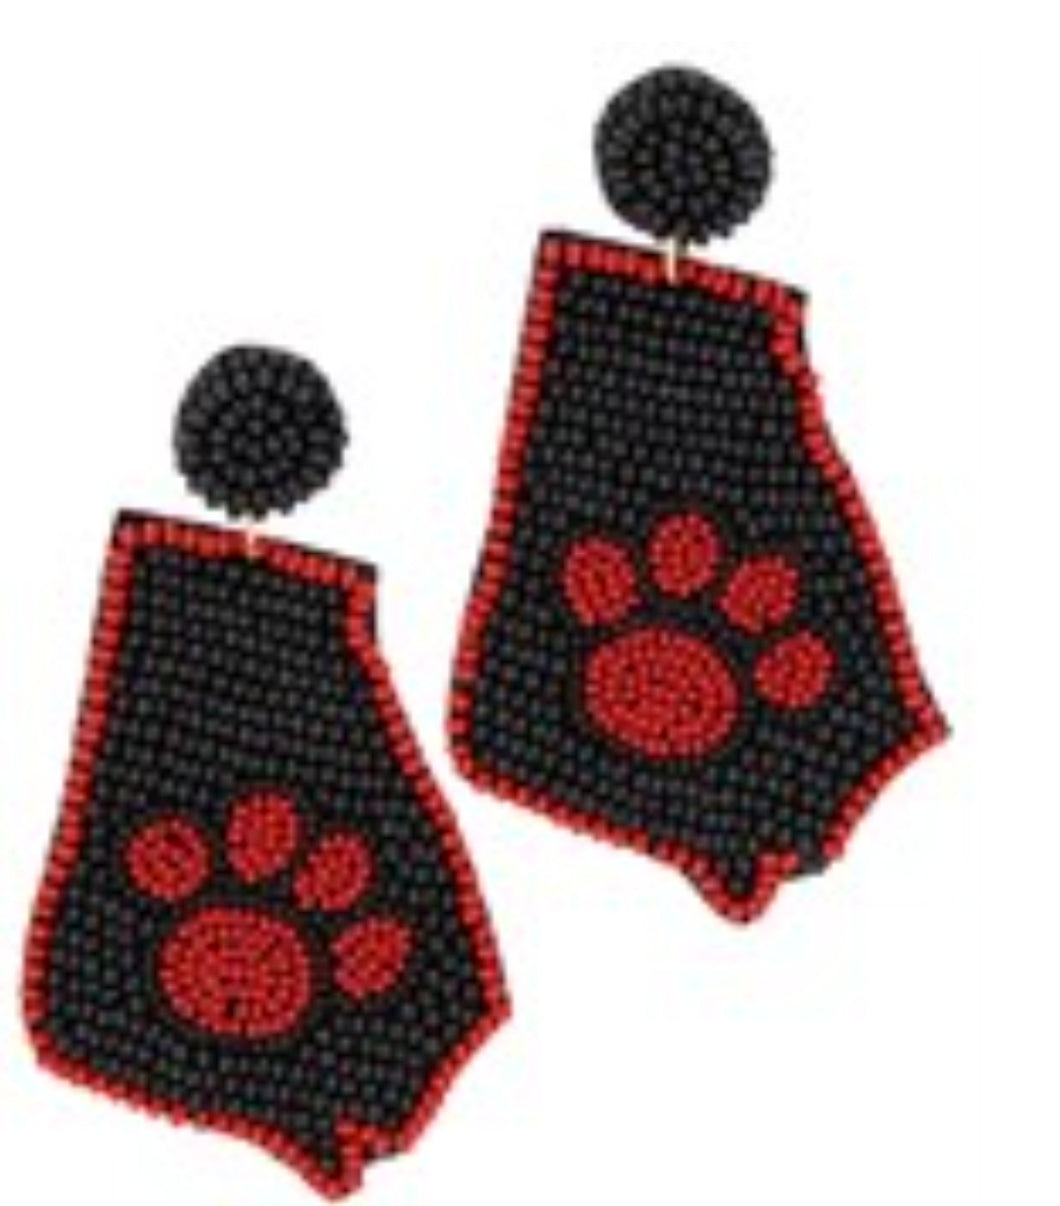 RED AND BLACK SEED BEAD GEORGIA BULLDOG EARRINGS - STATE with paws